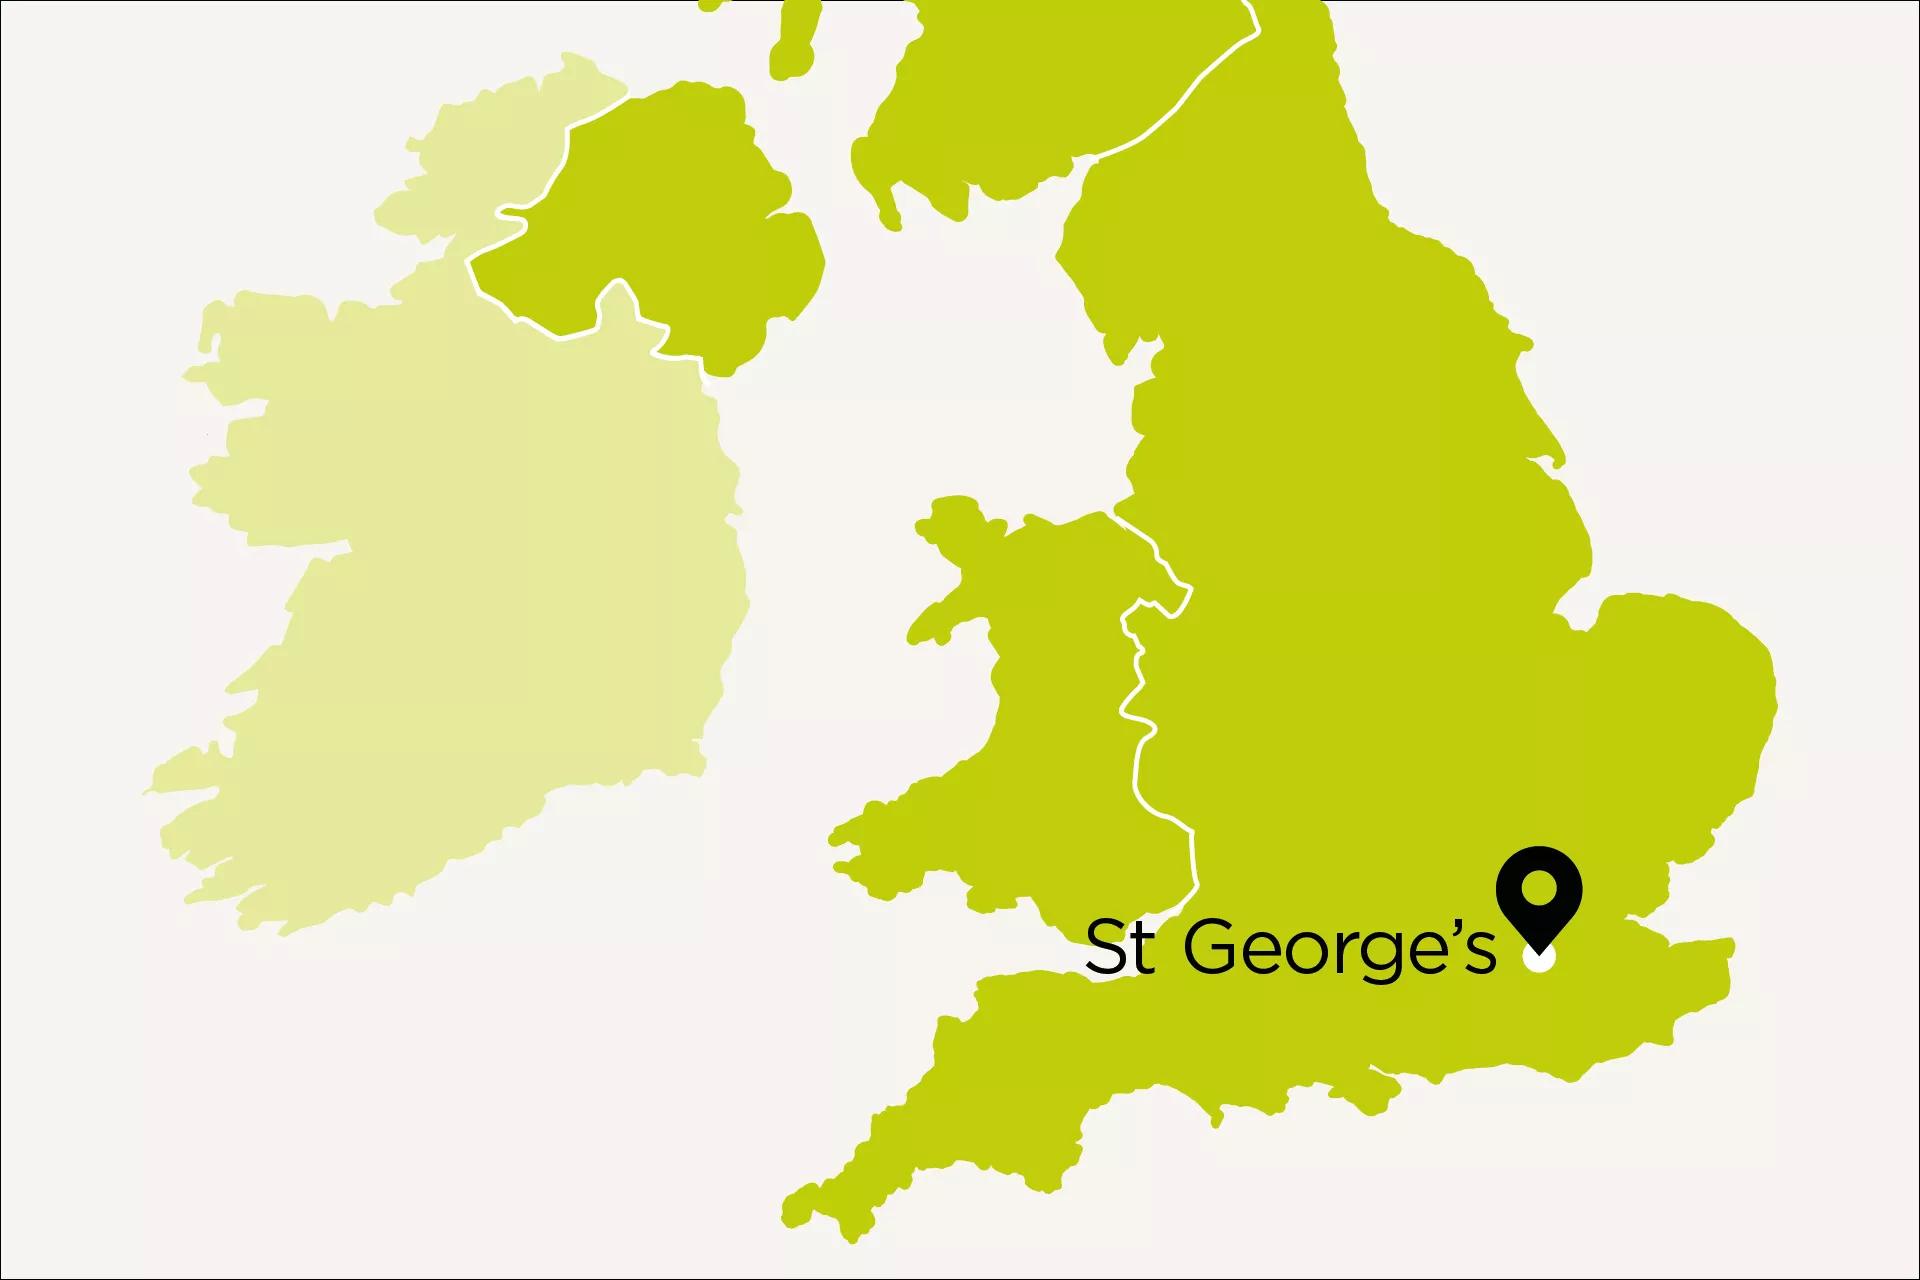 Map of UK with St. George's pinpoint